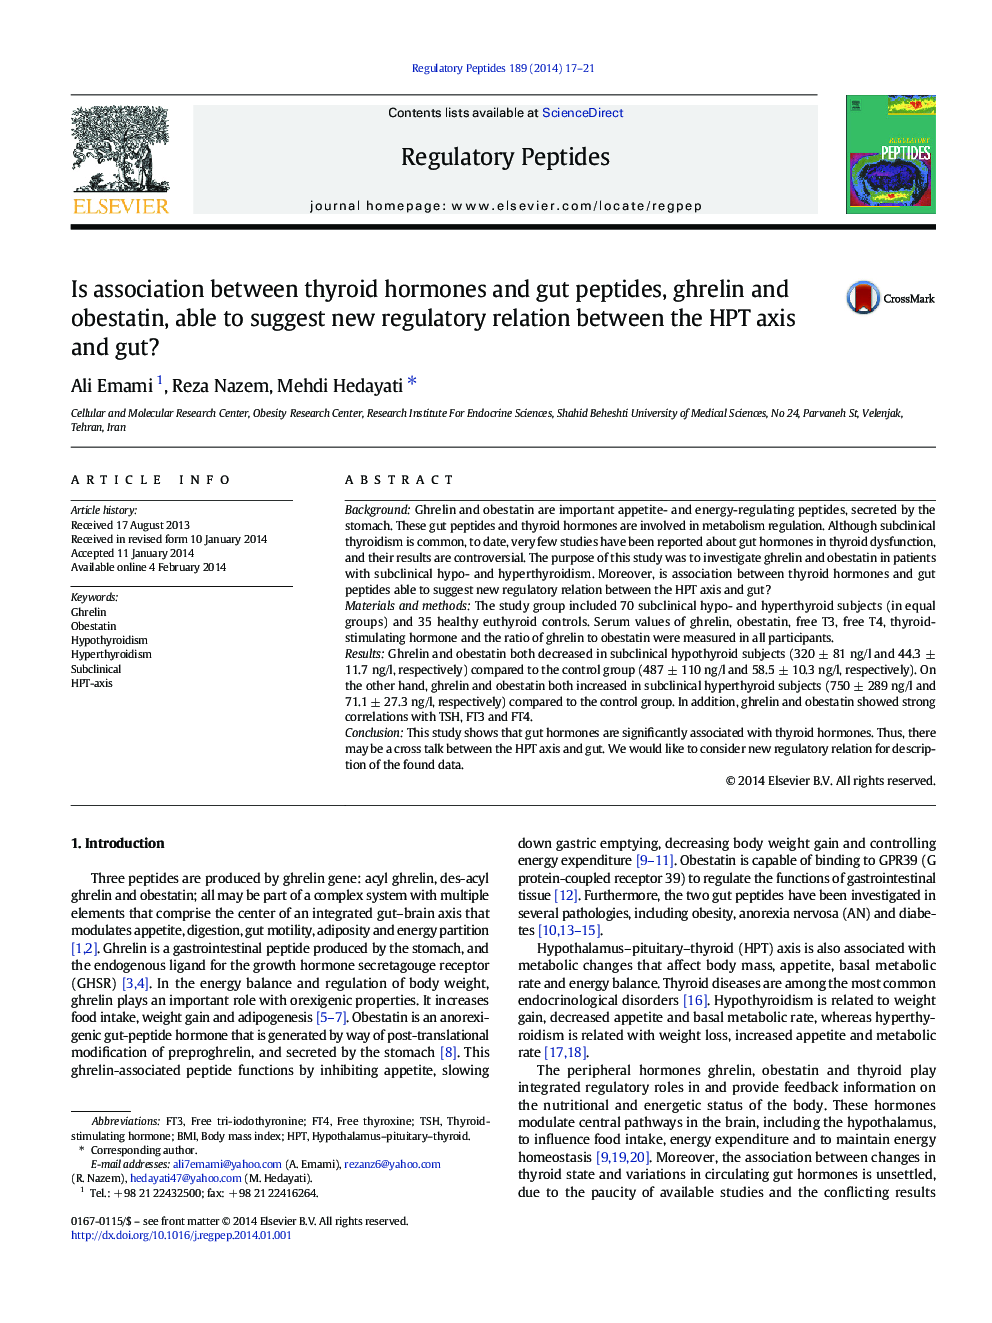 Is association between thyroid hormones and gut peptides, ghrelin and obestatin, able to suggest new regulatory relation between the HPT axis and gut?